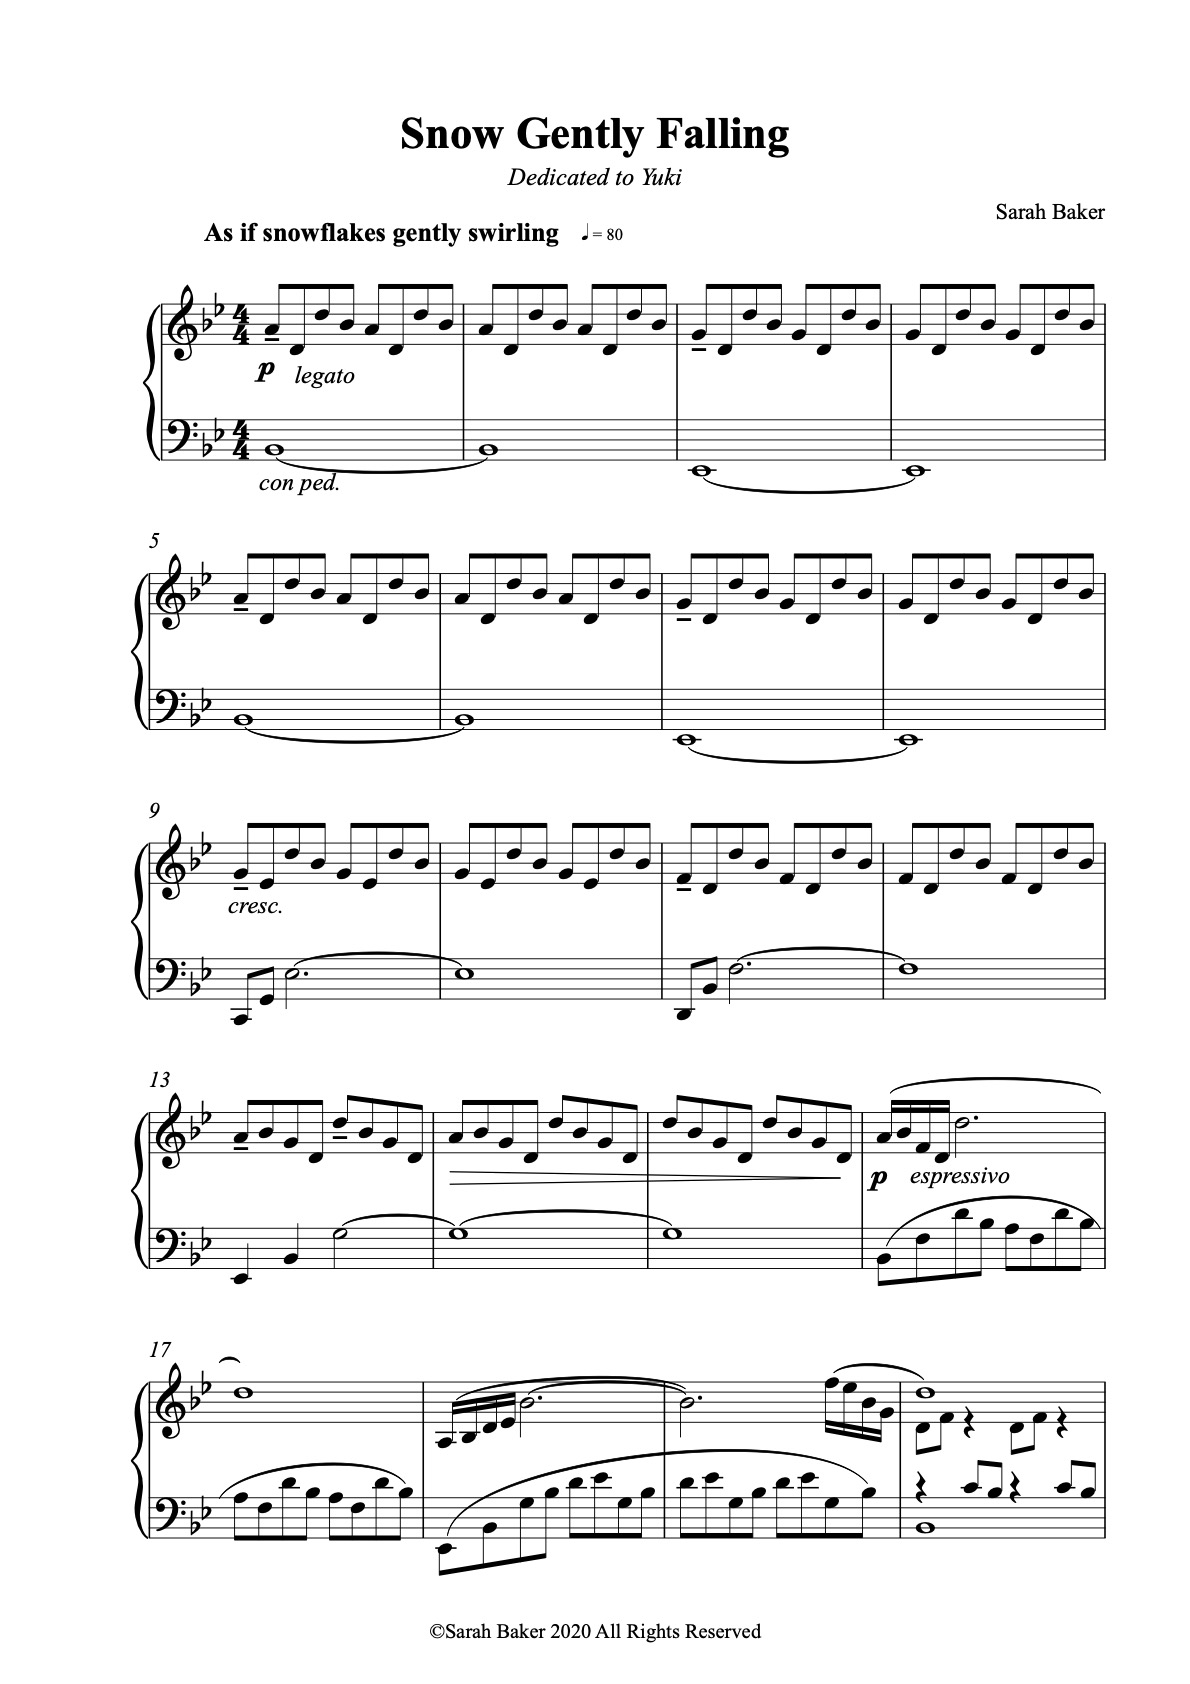 Snow Gently Falling score example